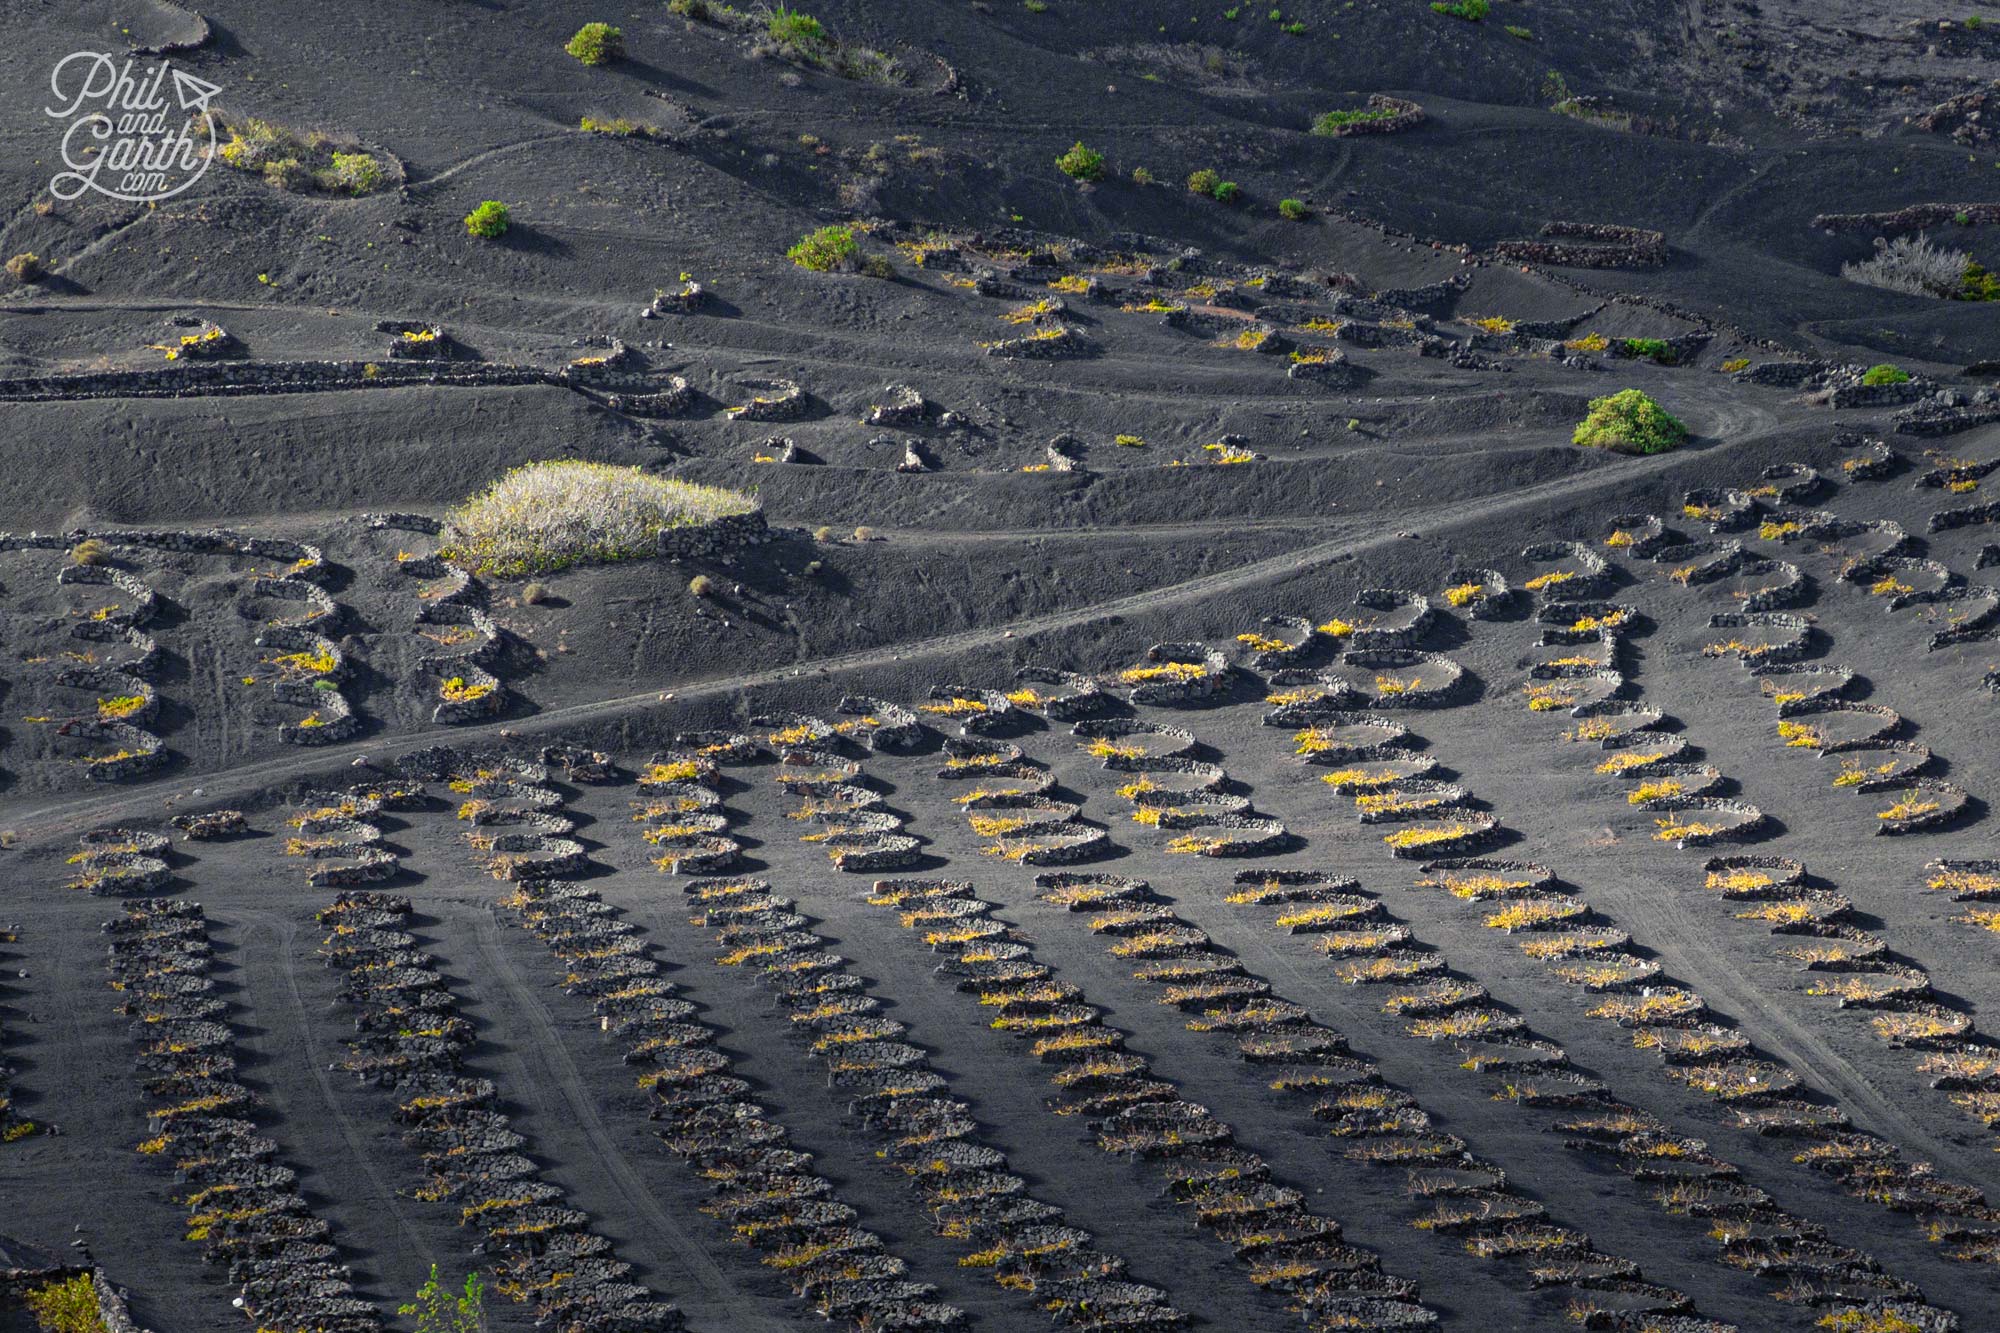 Patterns of ‘zocos’ cover the landsacape - lava rock walls that protect the vines